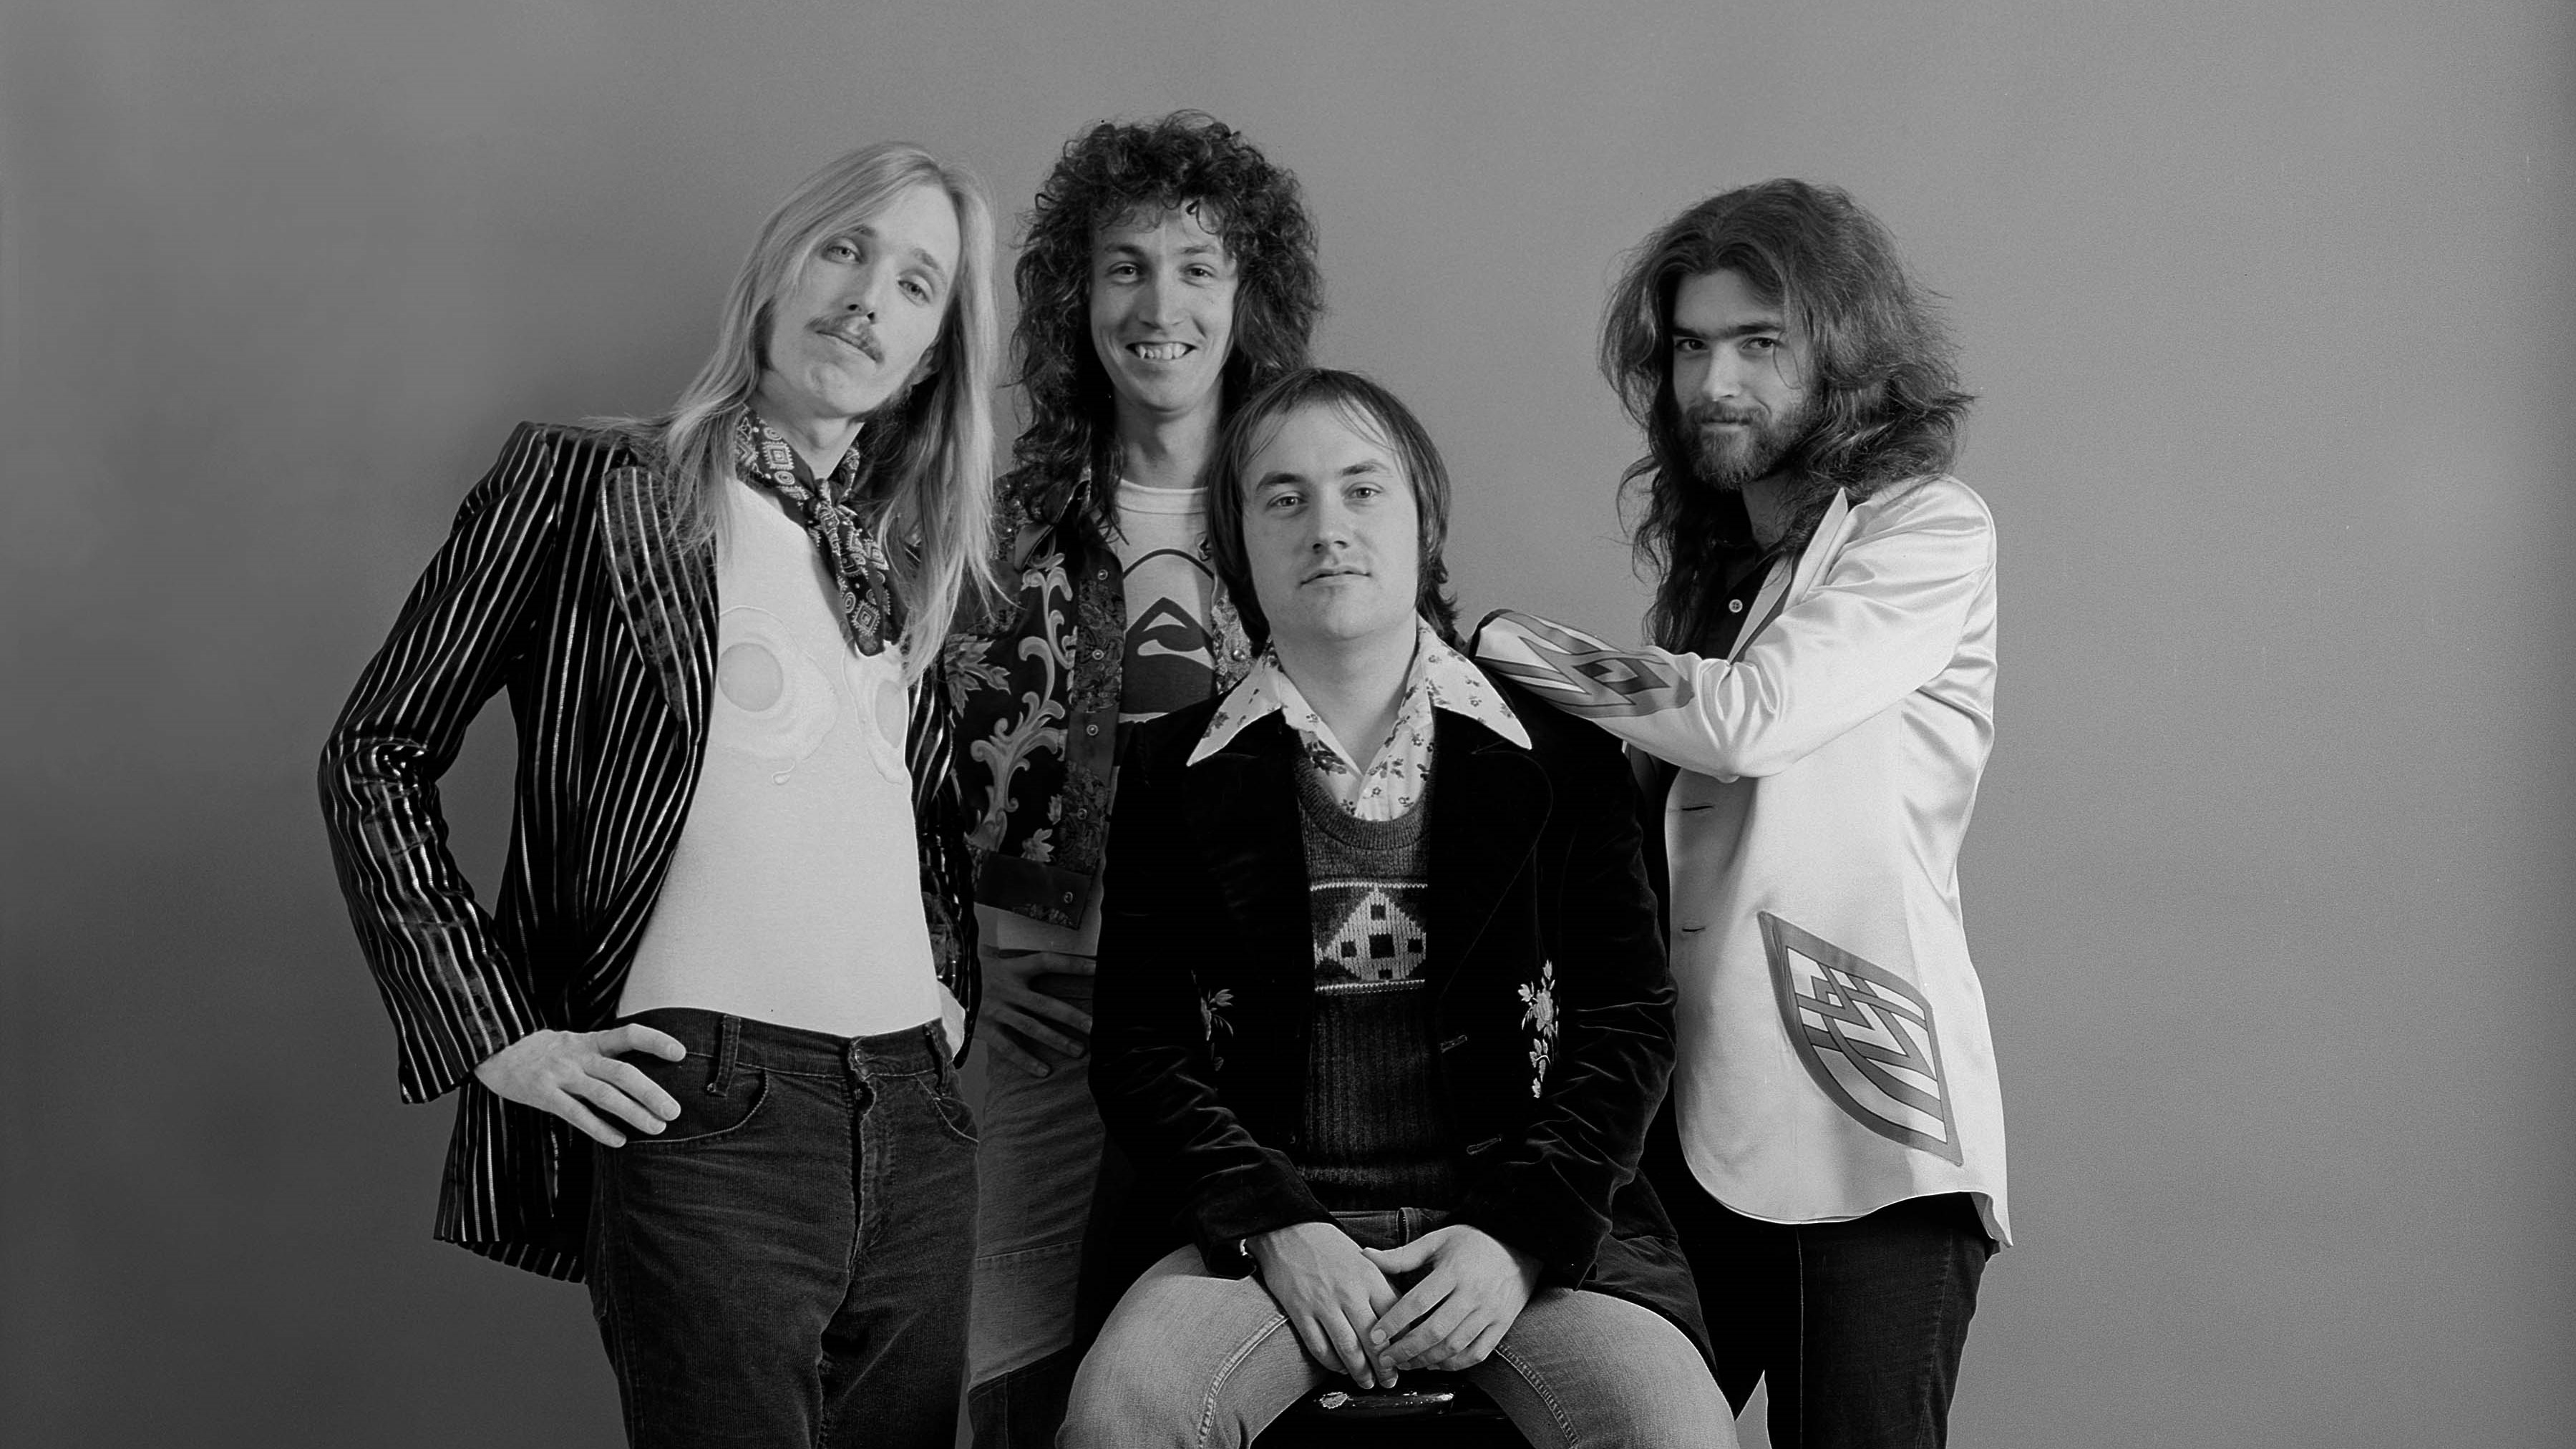 A black and white picture of Tom Petty, Mike Campbell, Randall Marsh, and Tom Leadon of the band Mudcrutch. Marsh sits on a stool and the other men stand around him.